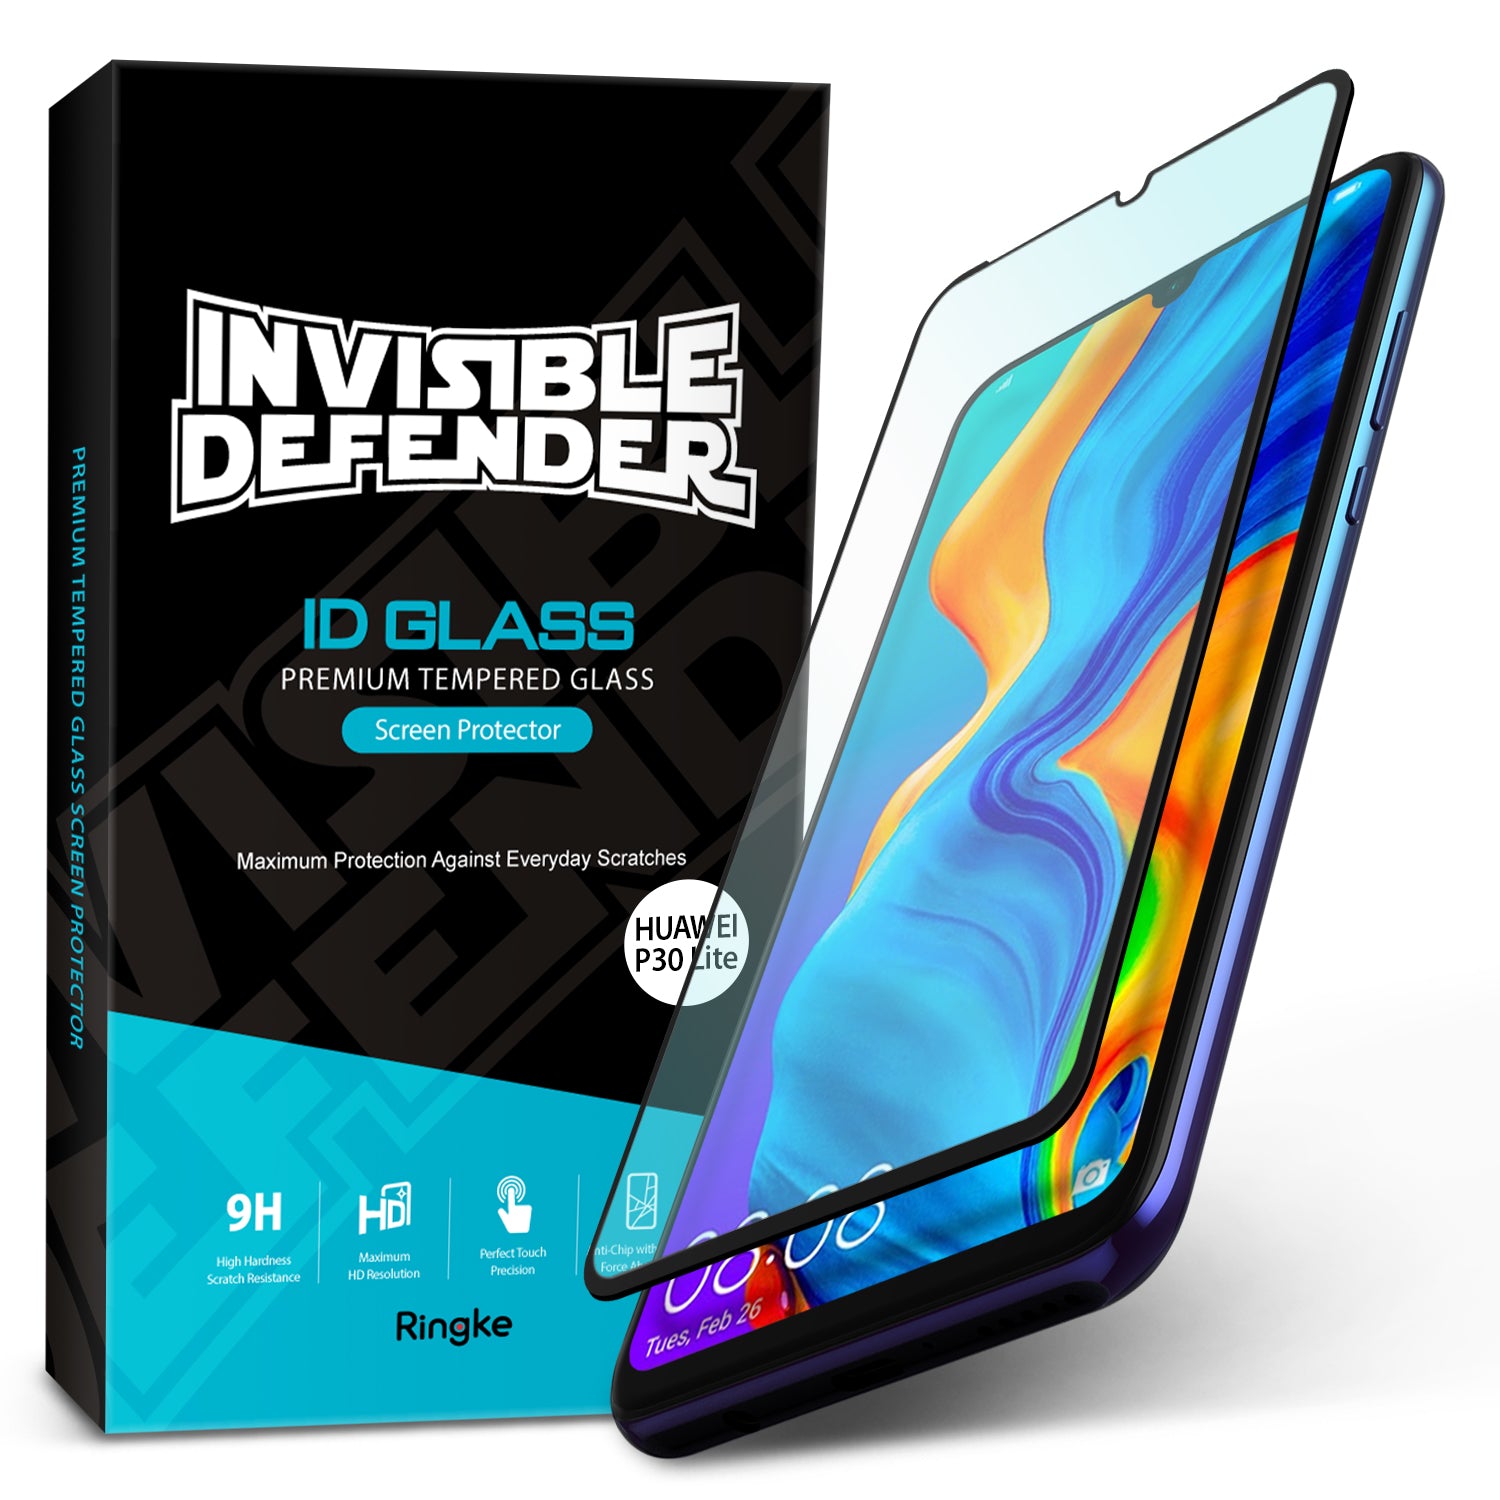 ringke invisible defender tempered glass screen protector for huawei p30 lite